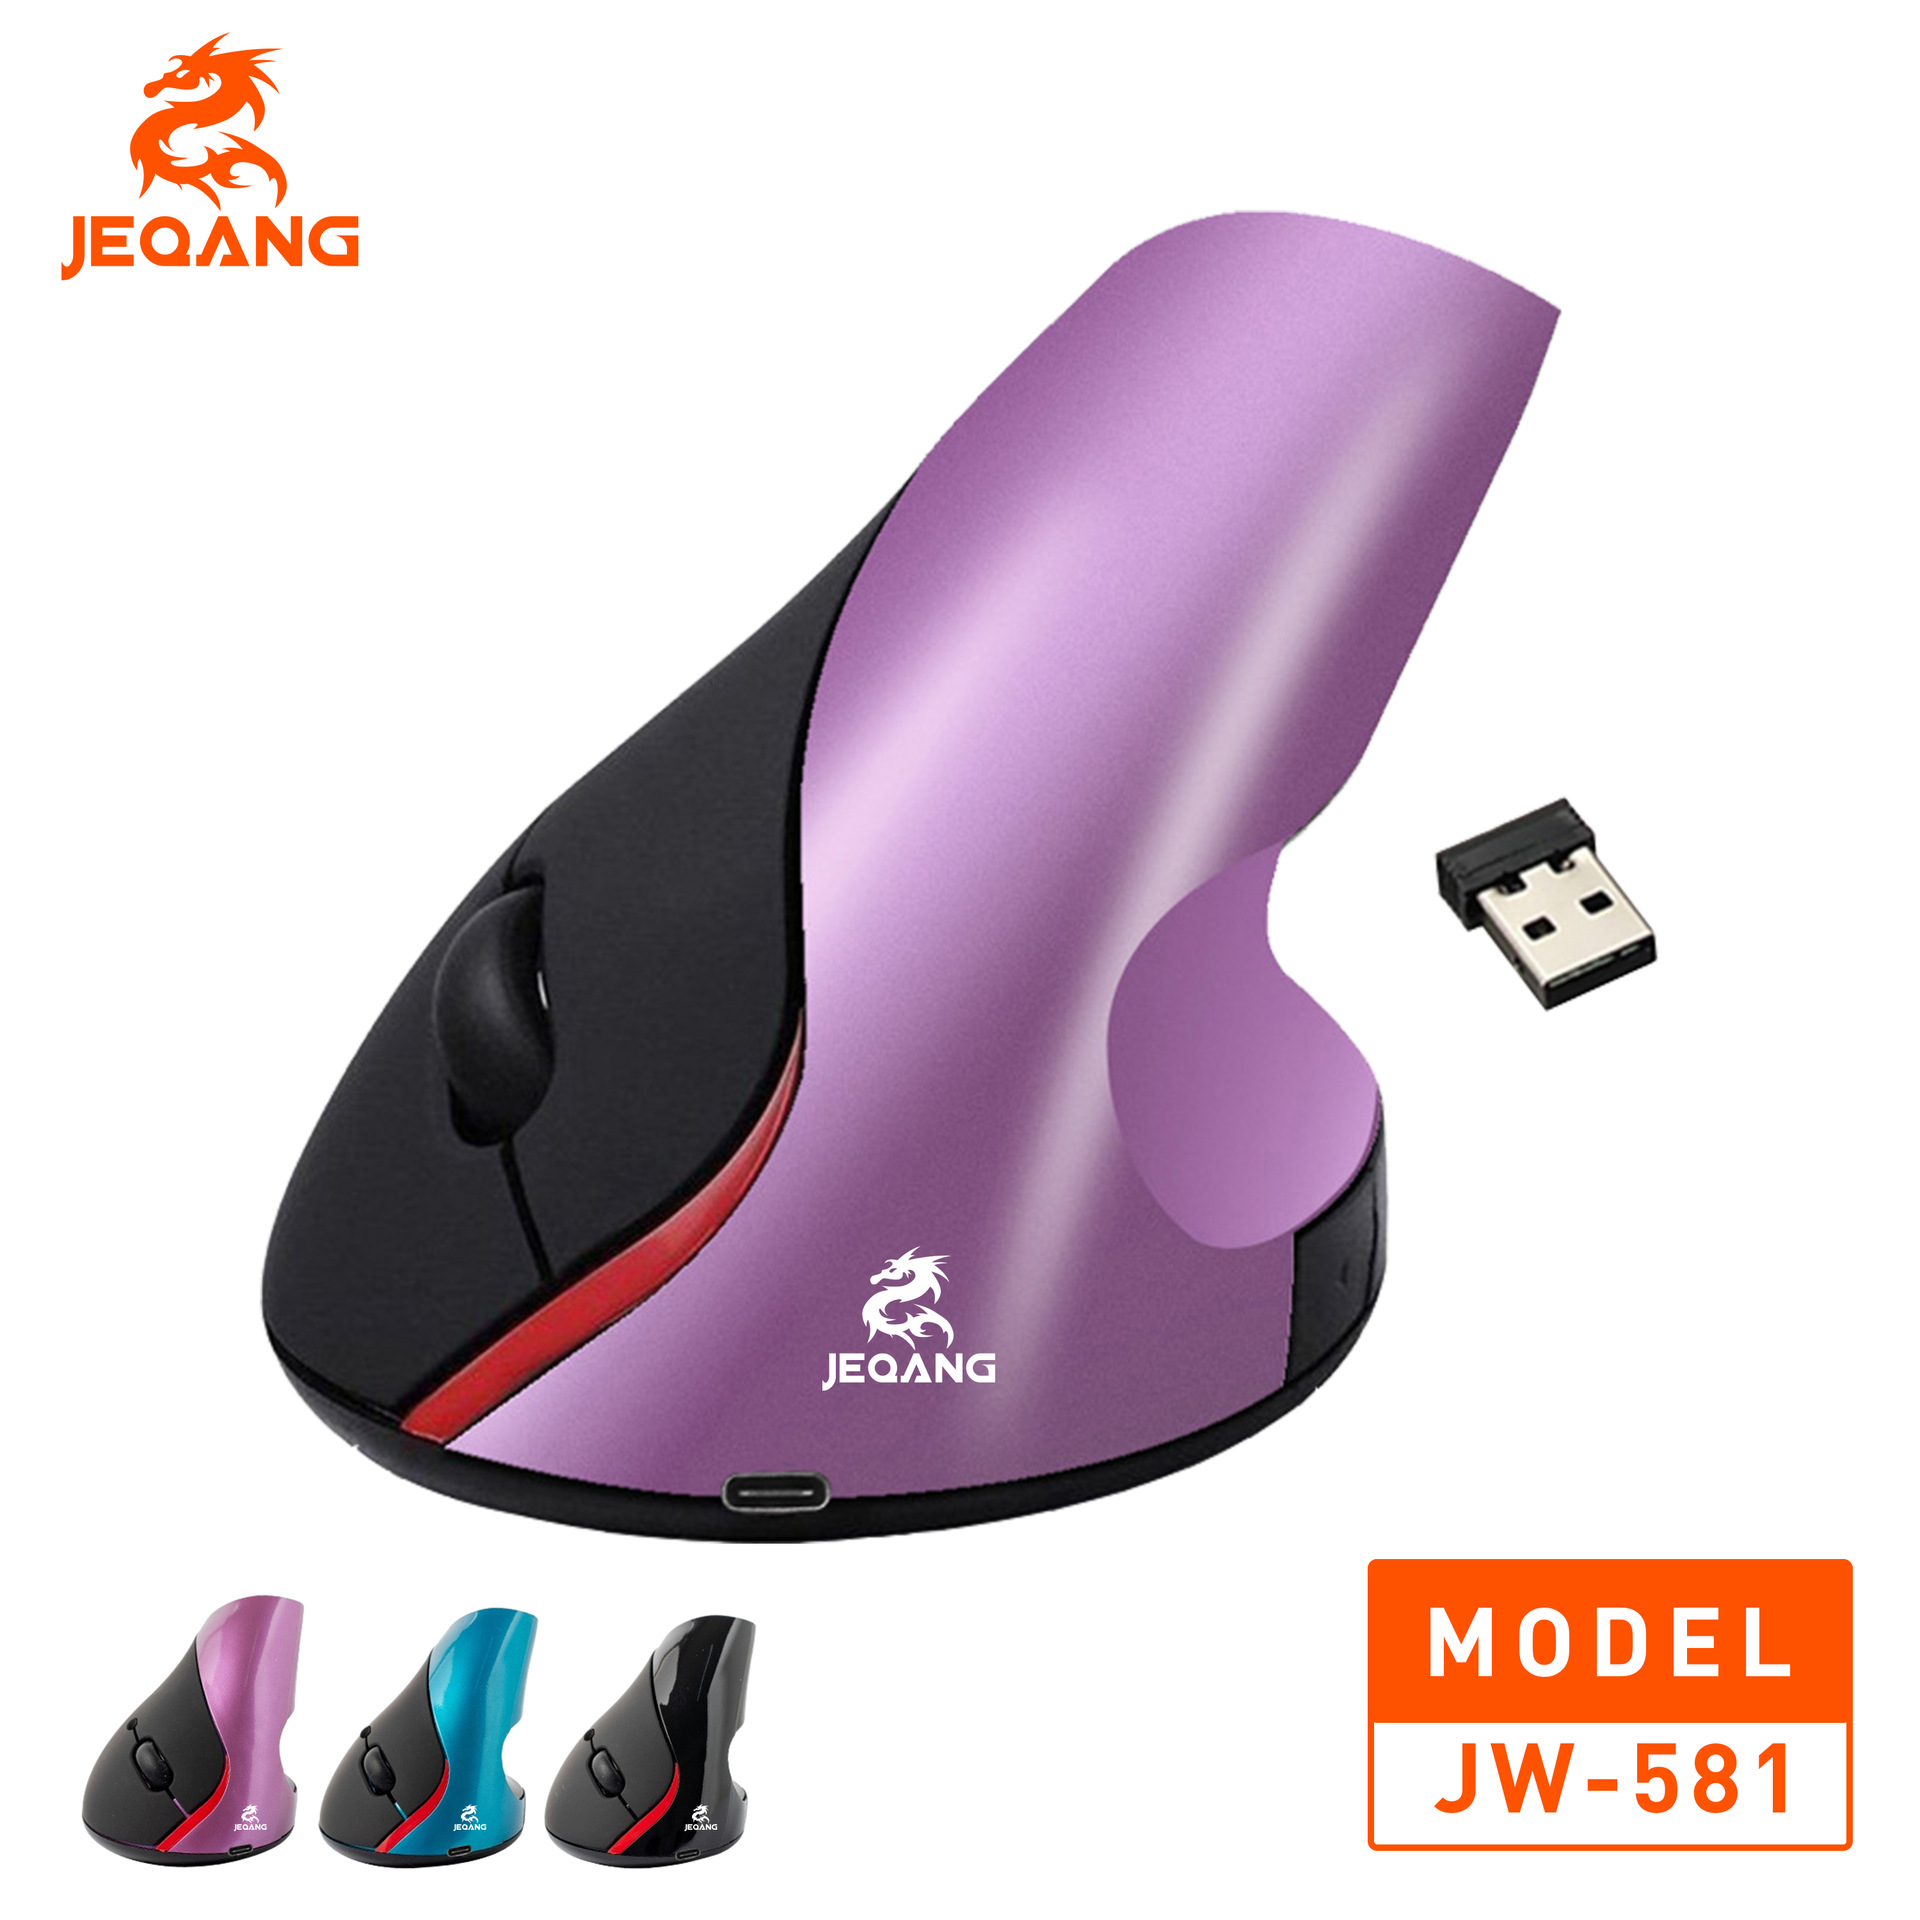 New 2.4G Wireless Stereo Vertical Mouse Ergonomic Design Suitable for Office Left and Right Hand Mouse